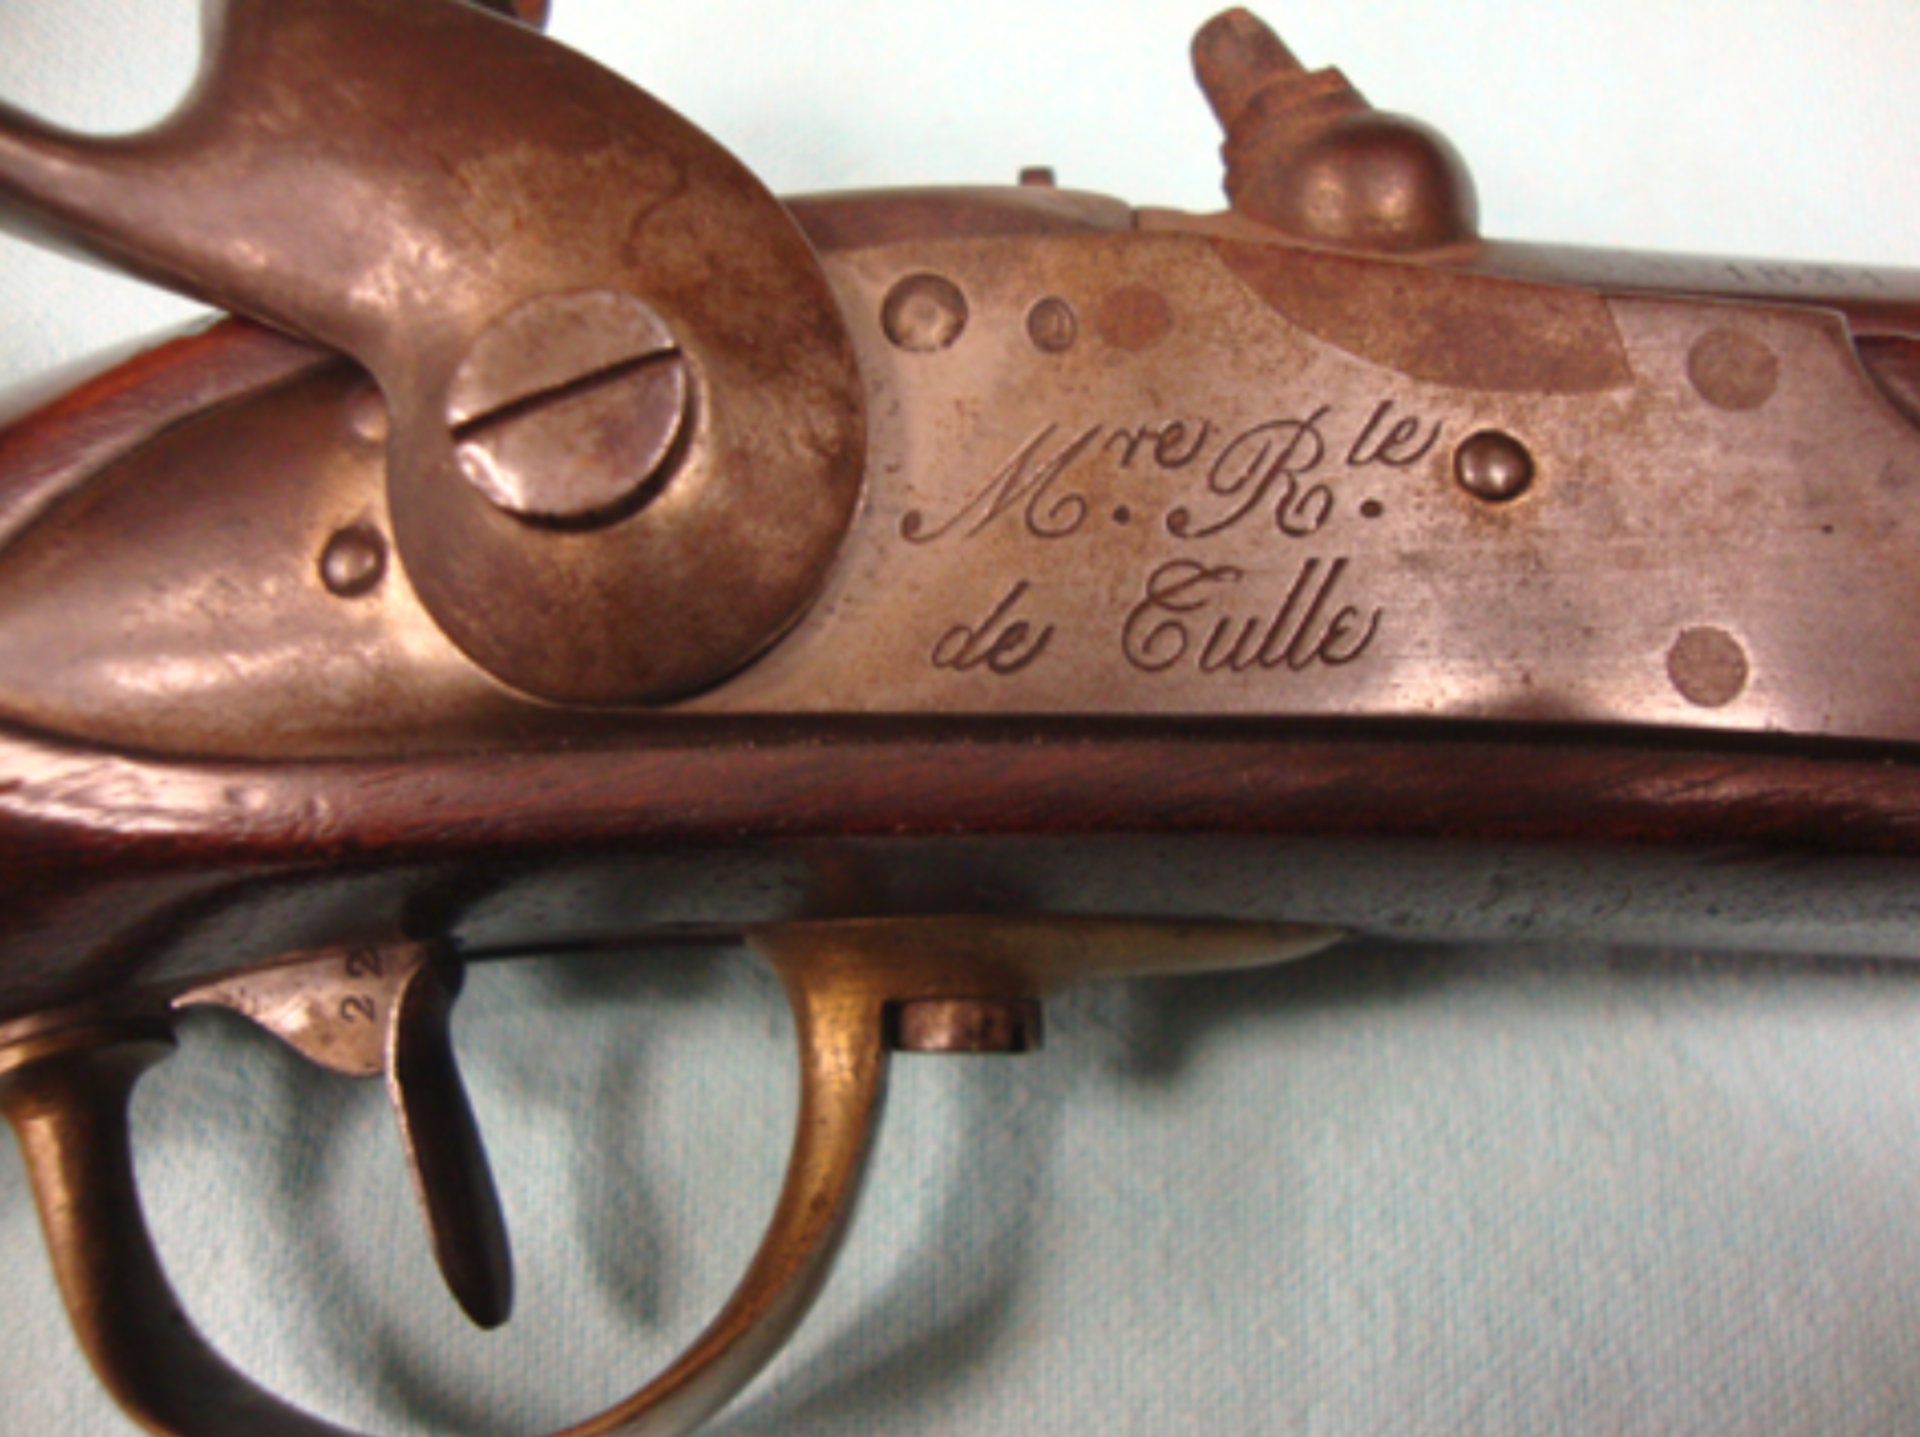 1831 French Model 1822 Challerault Cavalry Pistol Converted from Flintlock to Percussion. - Image 3 of 3